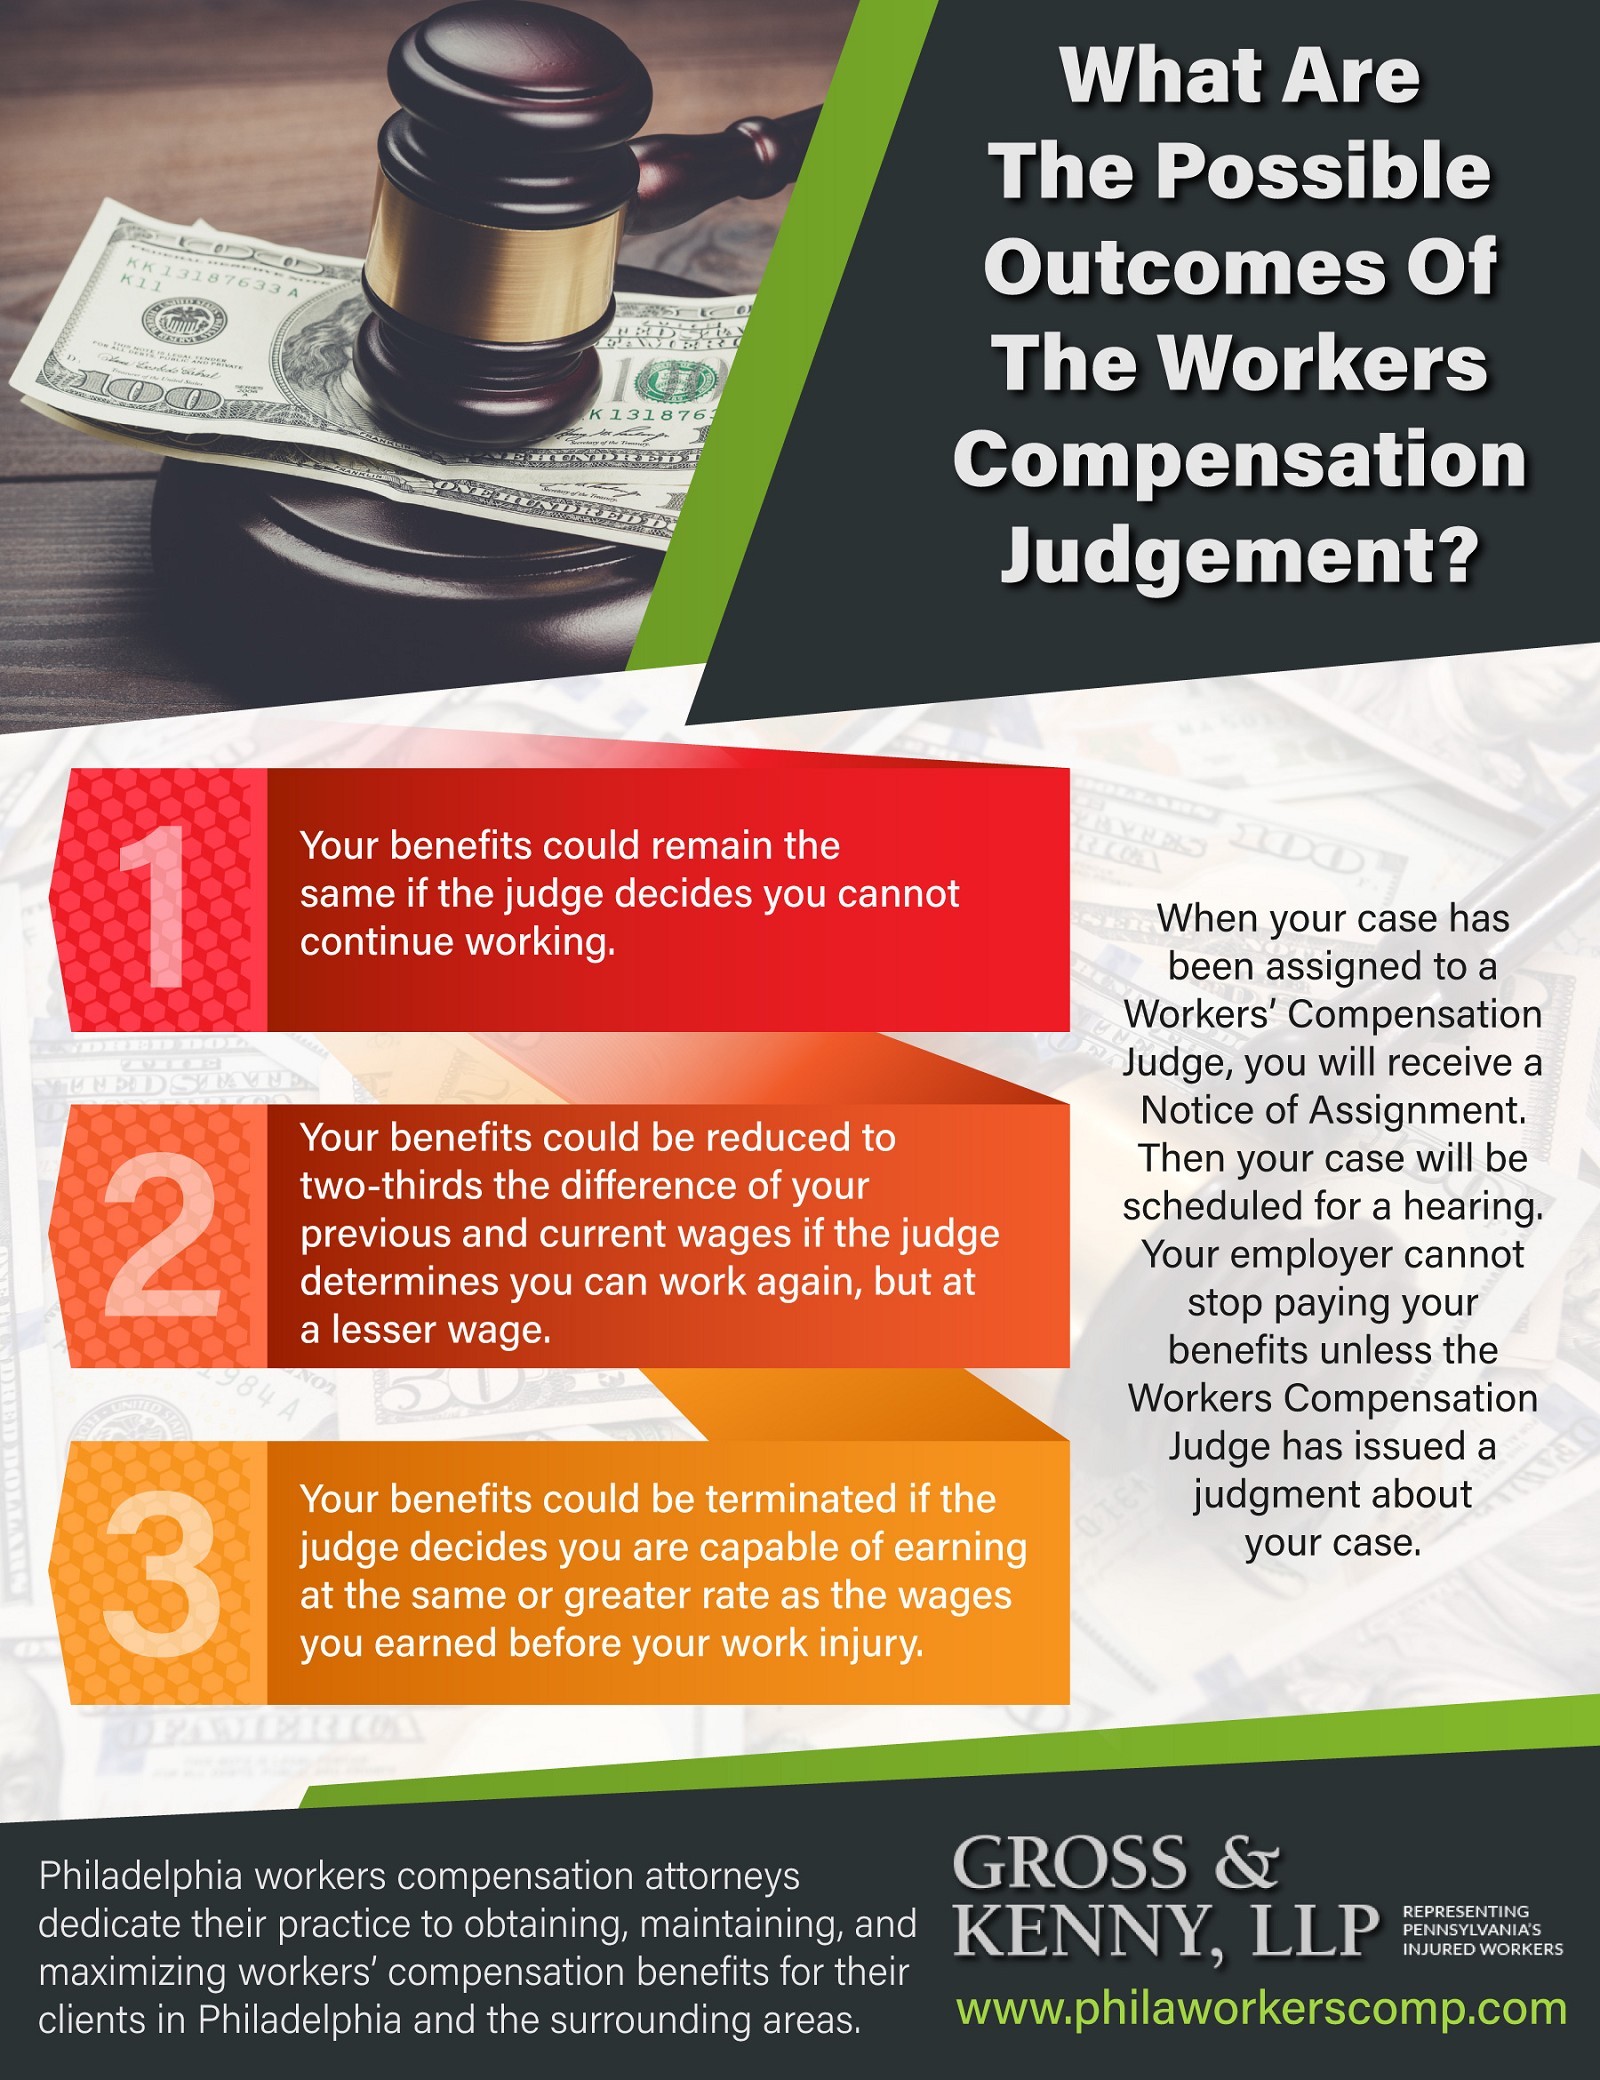 What Are The Possible Outcomes Of The Workers Compensation Judgment?